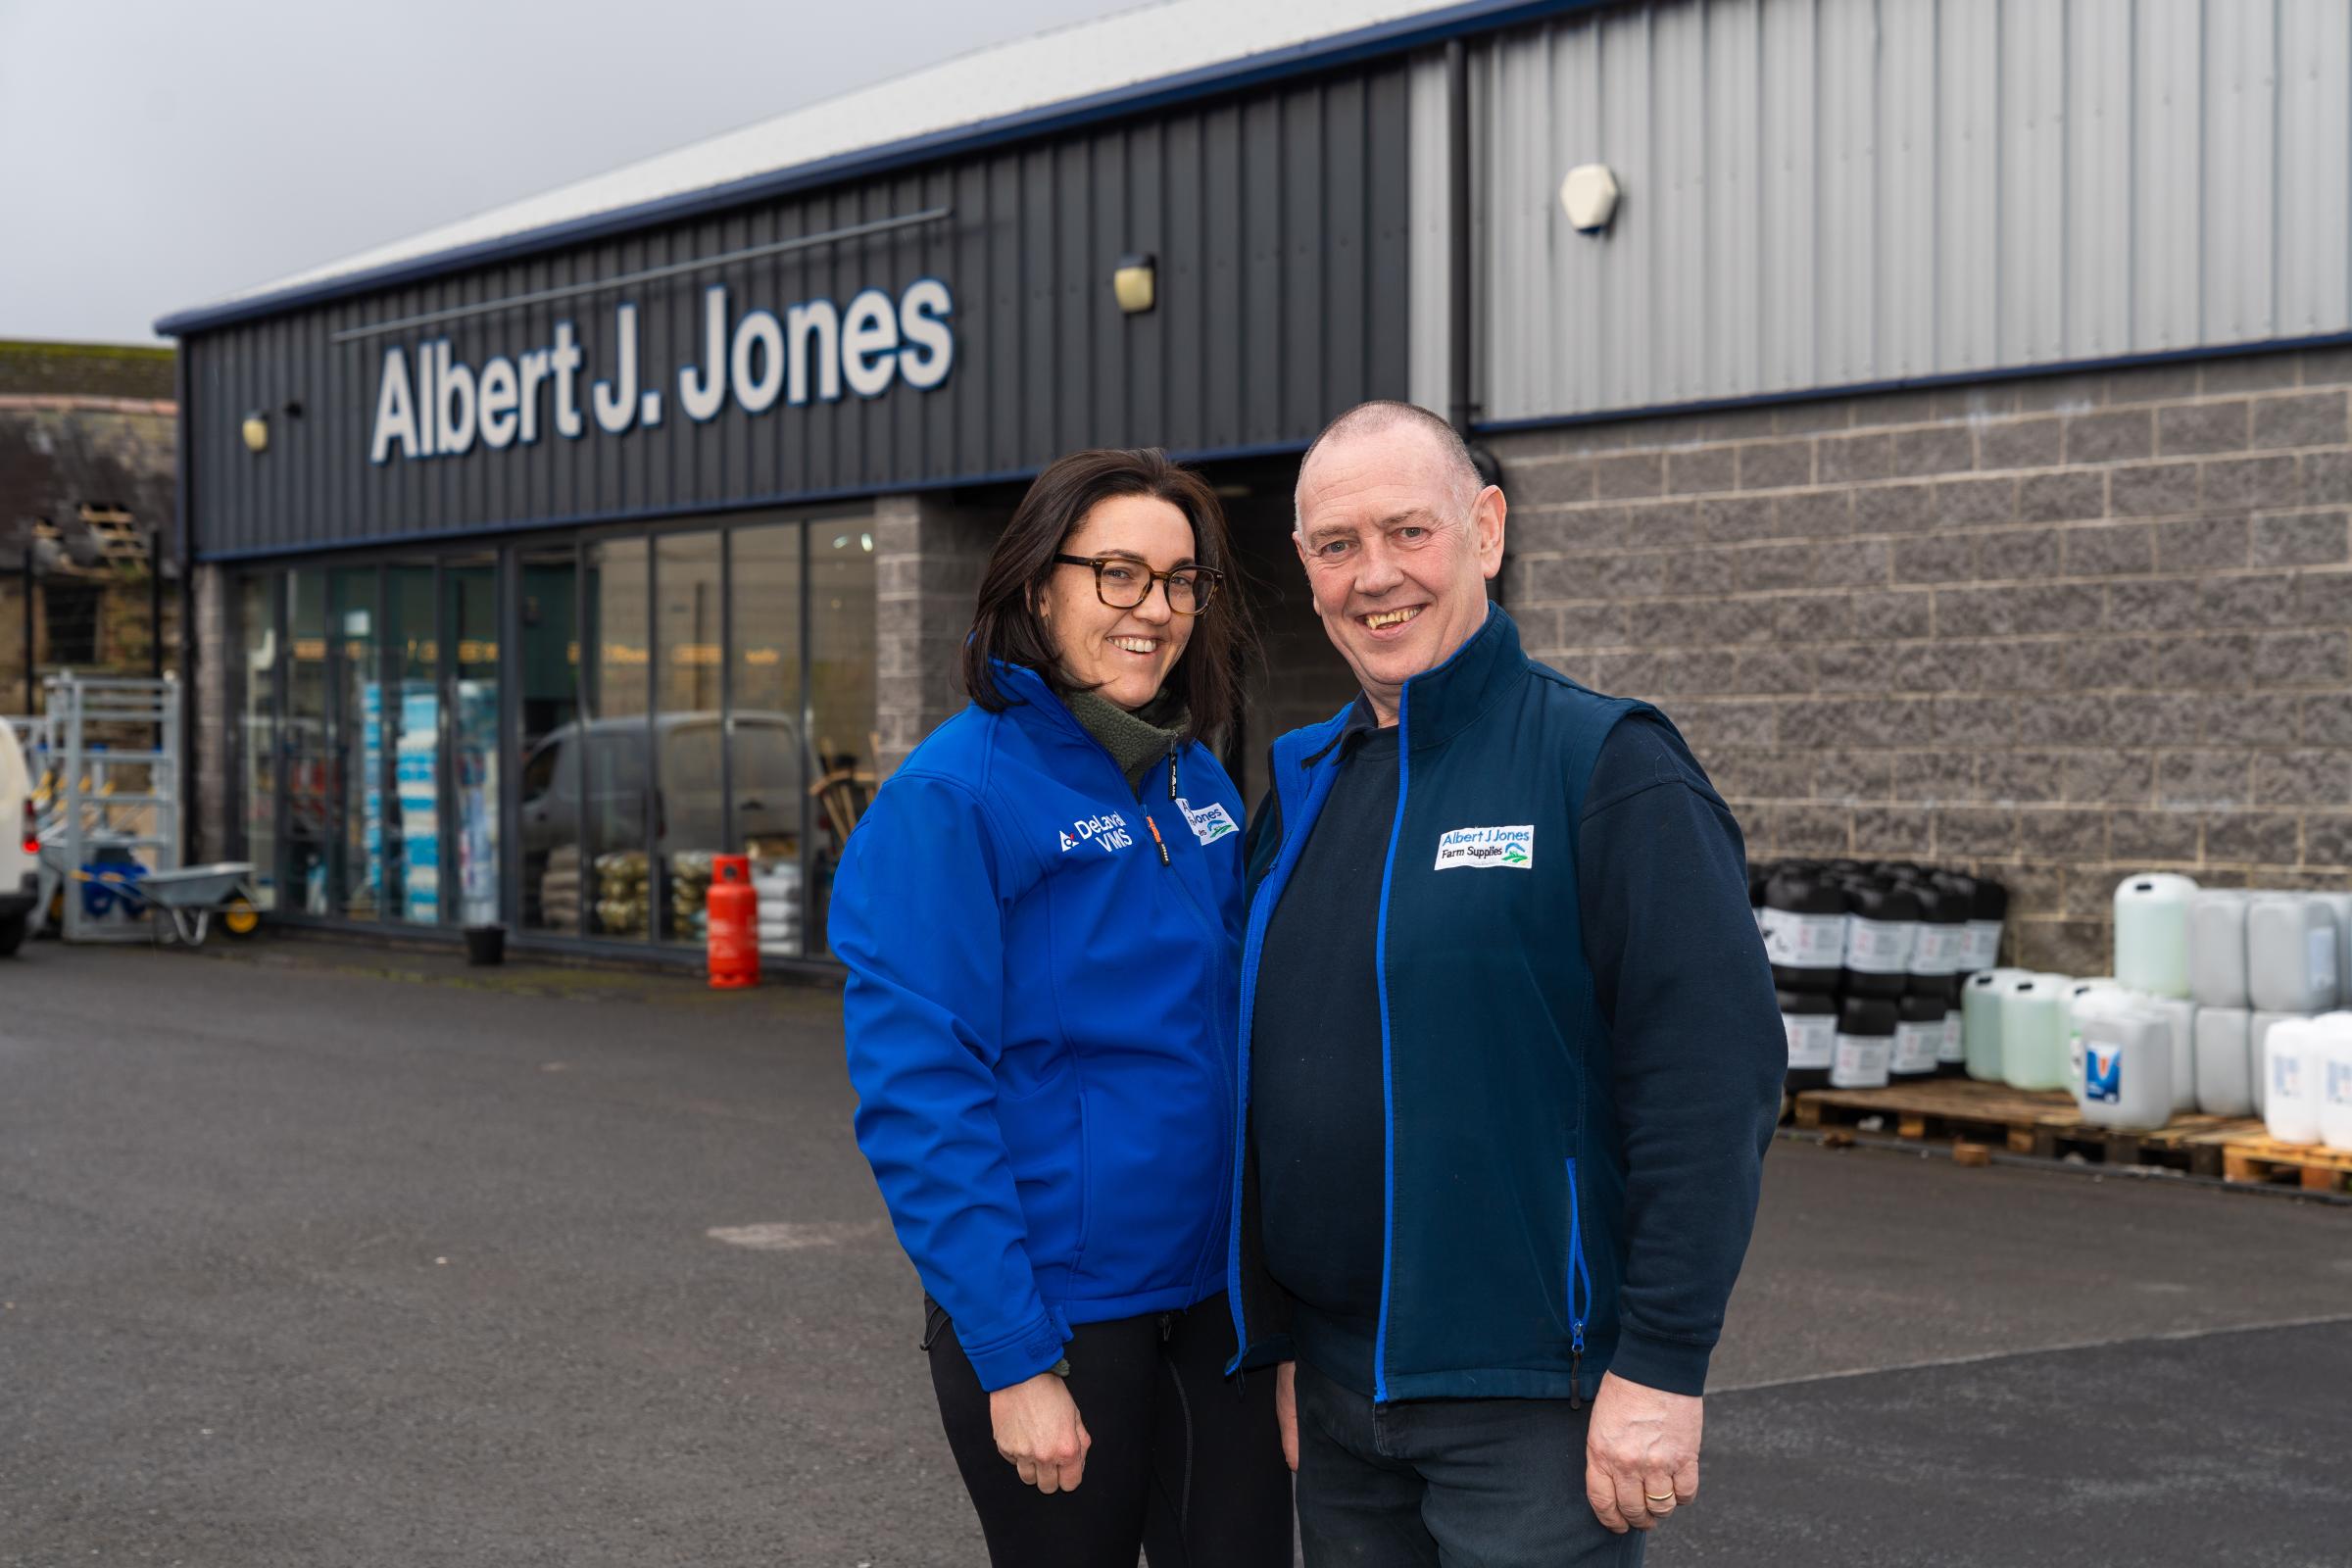 Cherrie Knight, Office Administrator and James McFarland, Manager, at Albert J Jones, Ederney. Picture: Ronan McGrade